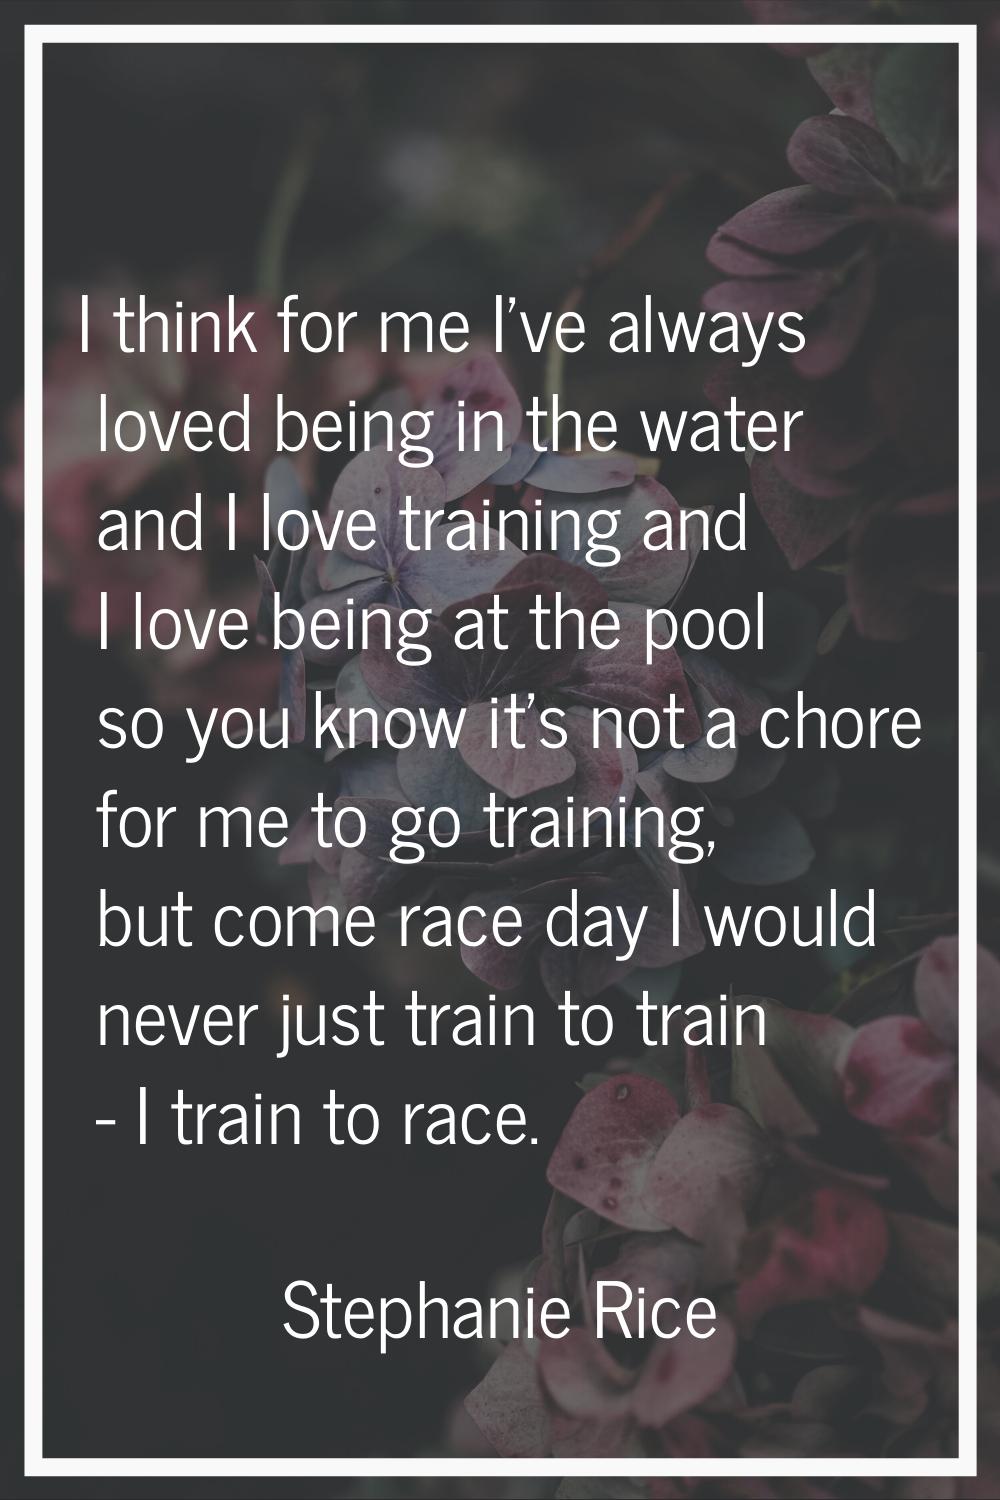 I think for me I've always loved being in the water and I love training and I love being at the poo